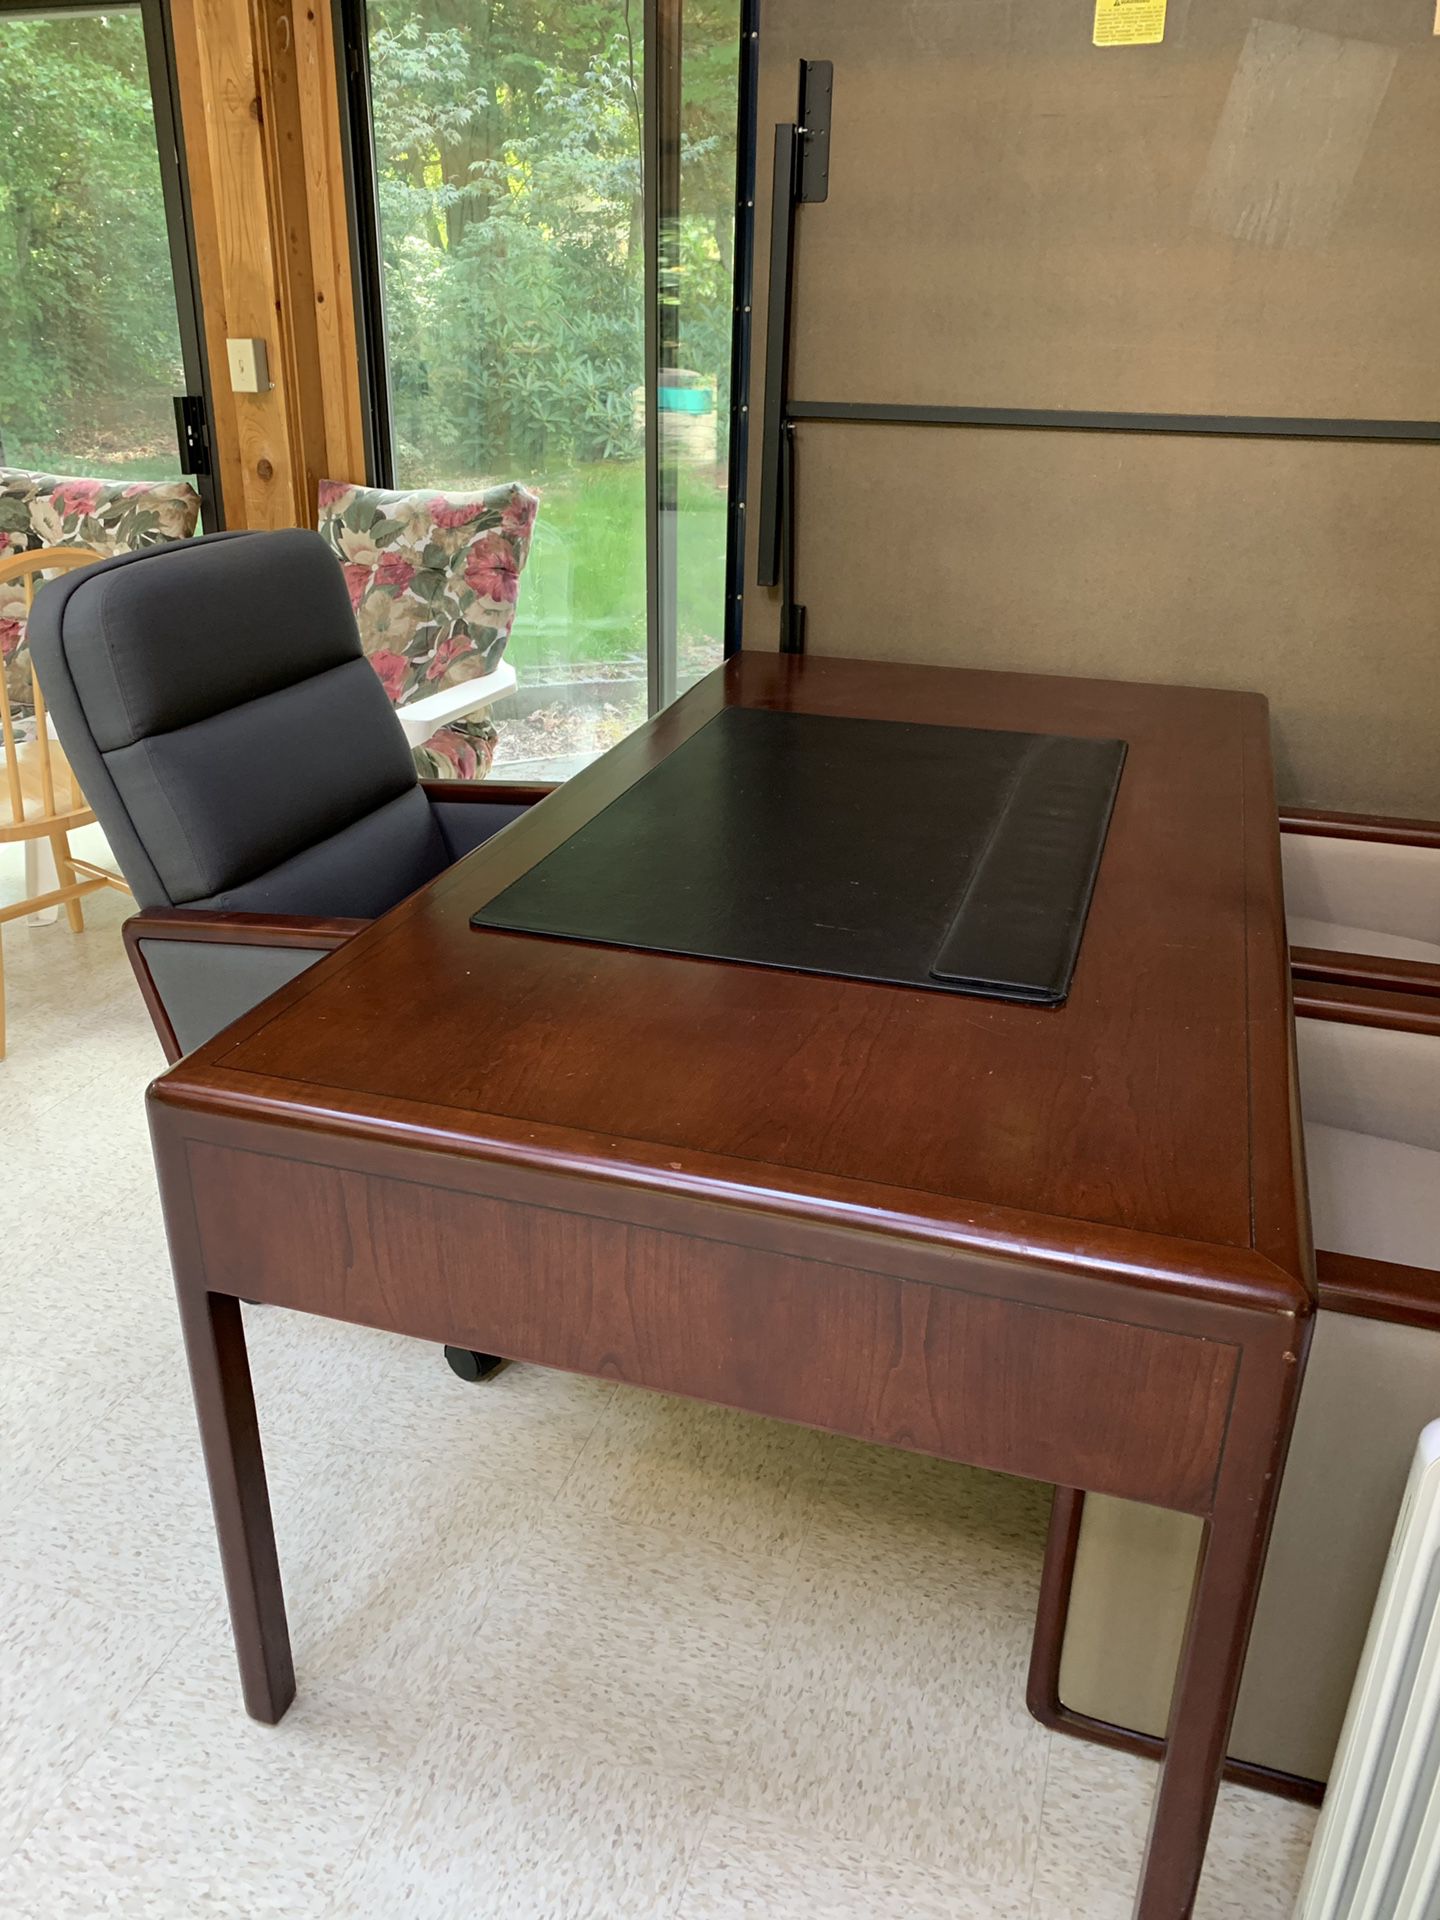 Rare solid wood office furniture. Table, office chairs, storage